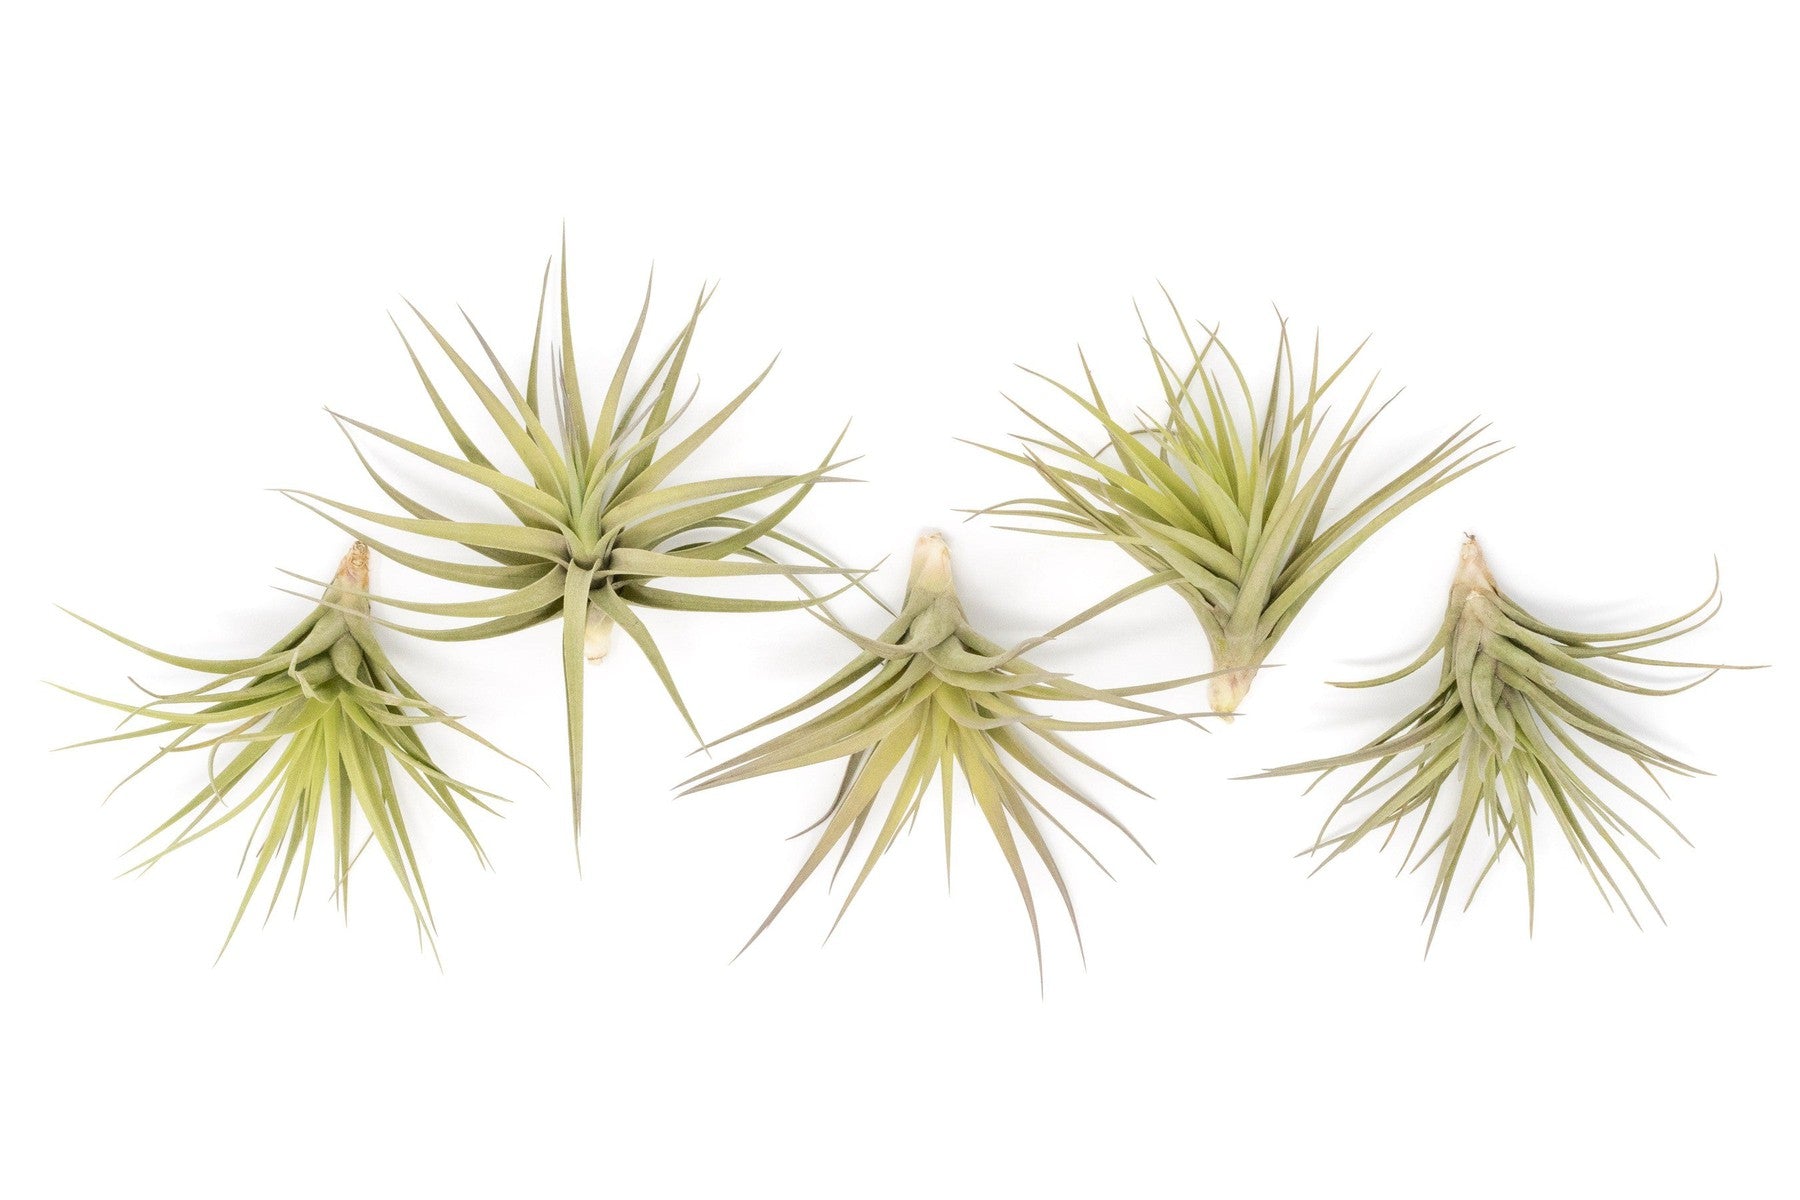 SALE - Tillandsia Aeranthos - Clavel del Aire - "Carnation of the Air" Air Plants-airplant-The Succulent Source